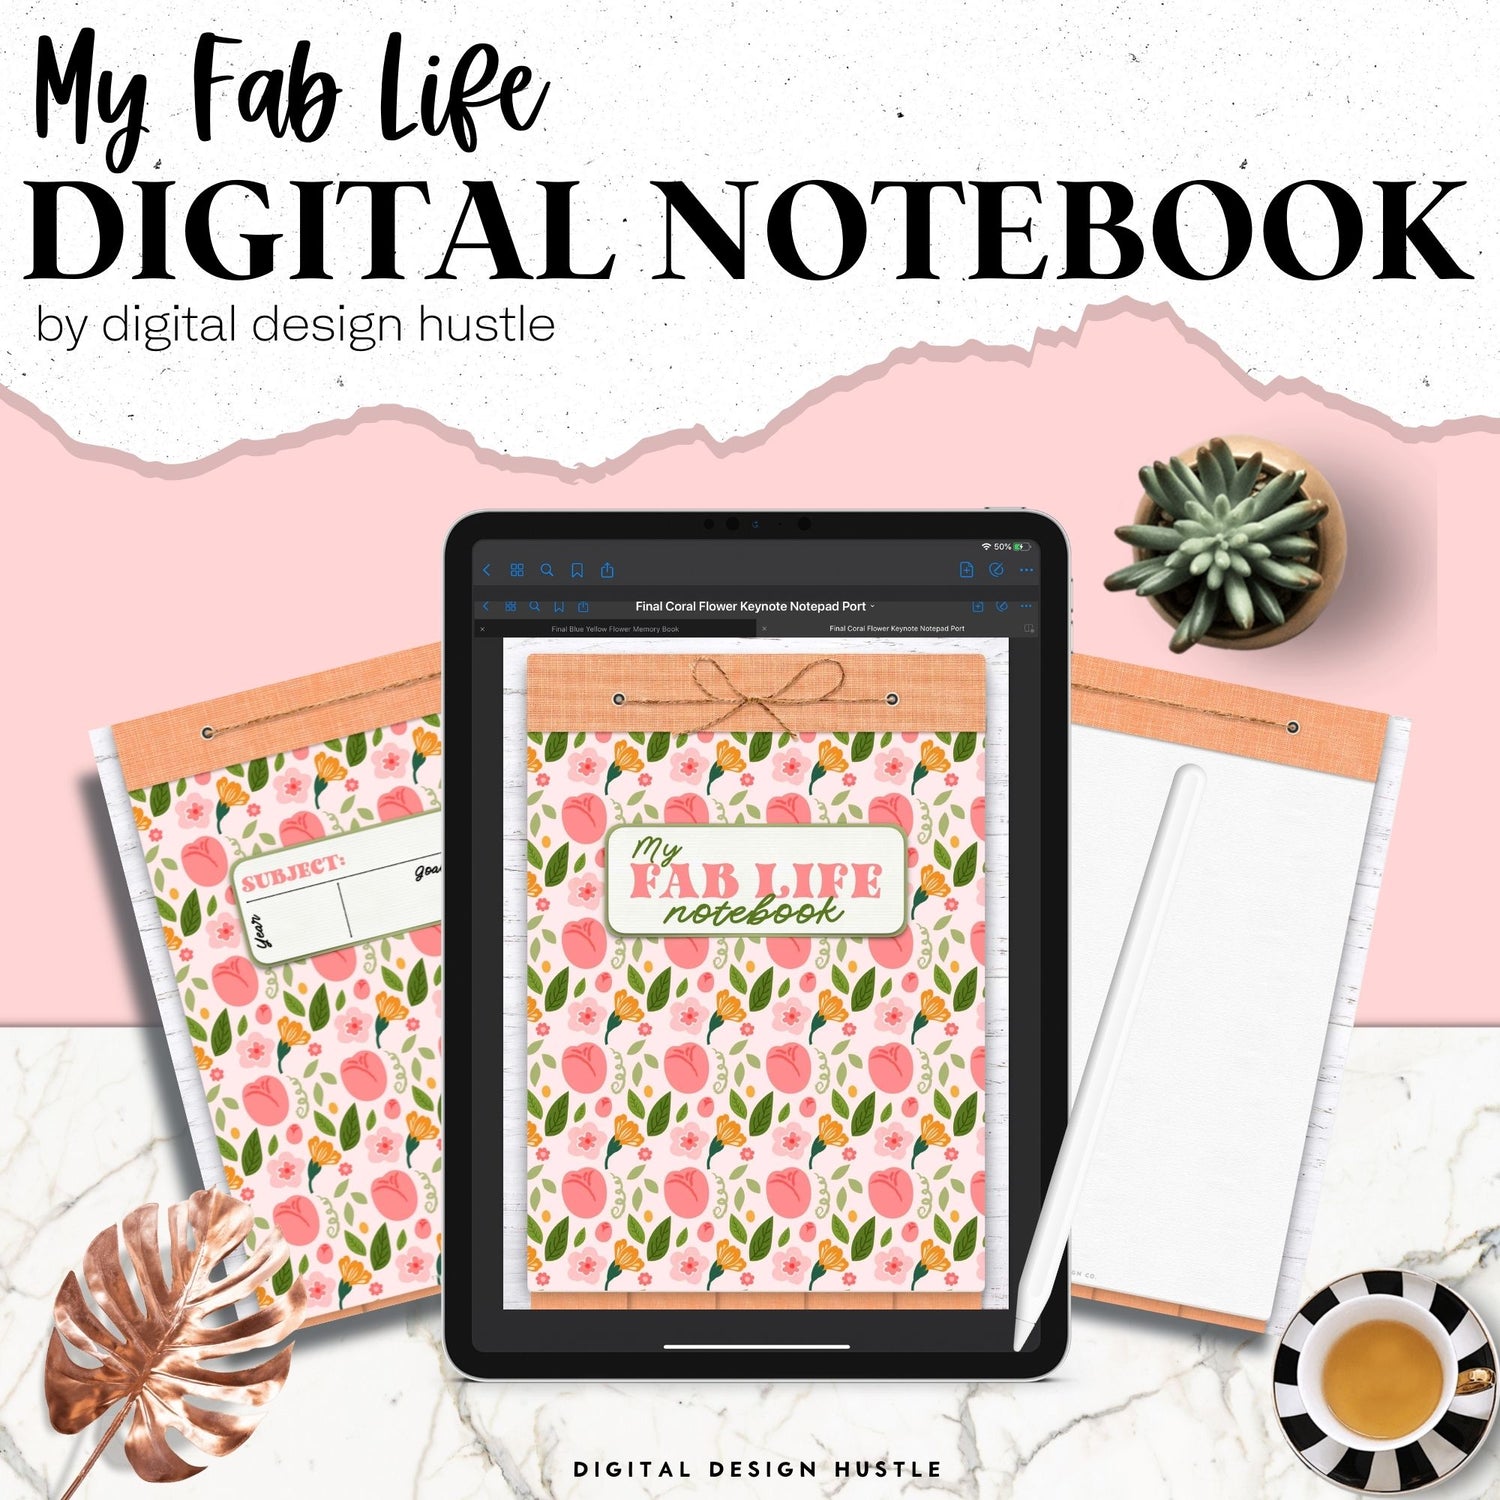 Take note of this pretty coral flower digital planning notebook set. This digital notebook contains 5 different notebook styles: Blank, Bullet Journal, Lined Notebook, Bullet Journal and Cornell Note Paper. Keep track of all your lists, activities, goals, and day to day life with this fun digital notebook.